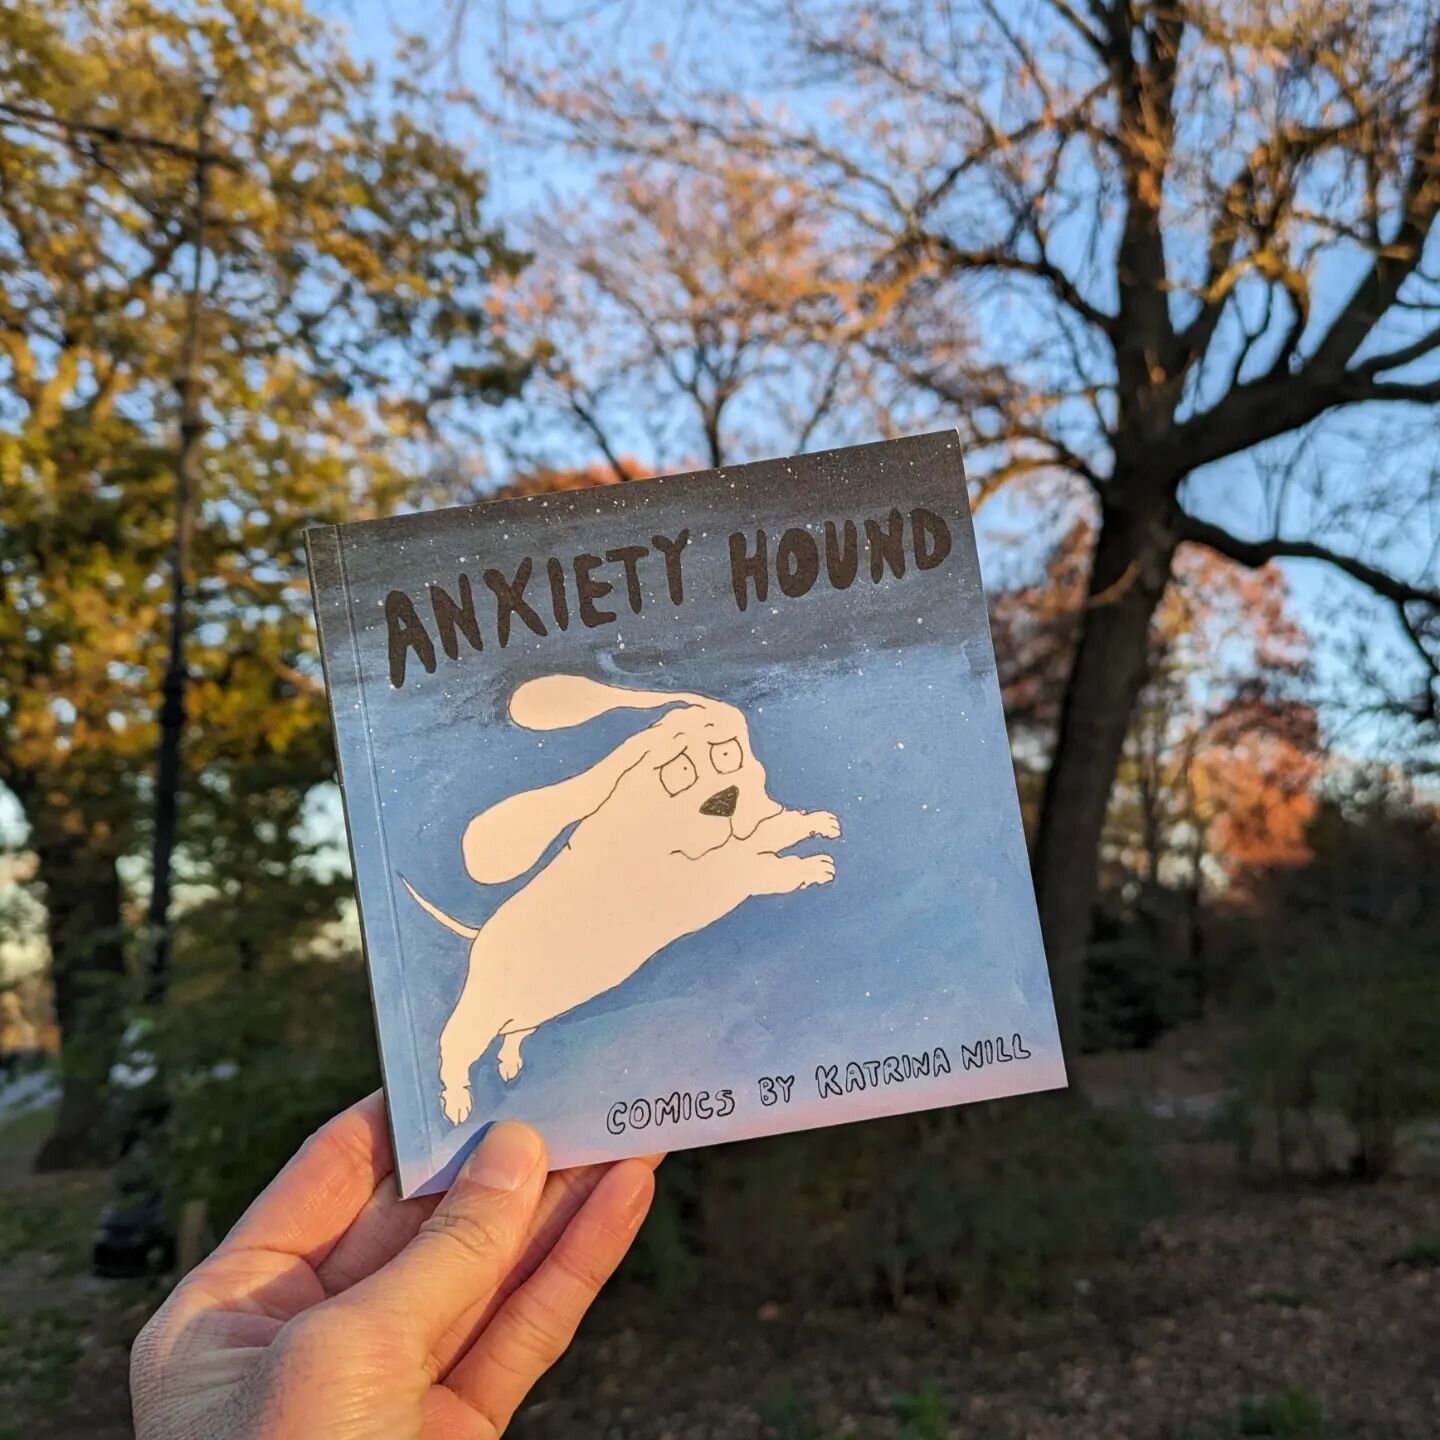 Anxiety Hound the book is here!! 100 pages of Hound comics and sketches from the last 7 years, freed from digital purgatory and beautifully printed by @fireballprints . It's small and square, great for keeping in your backpack to read on public trans